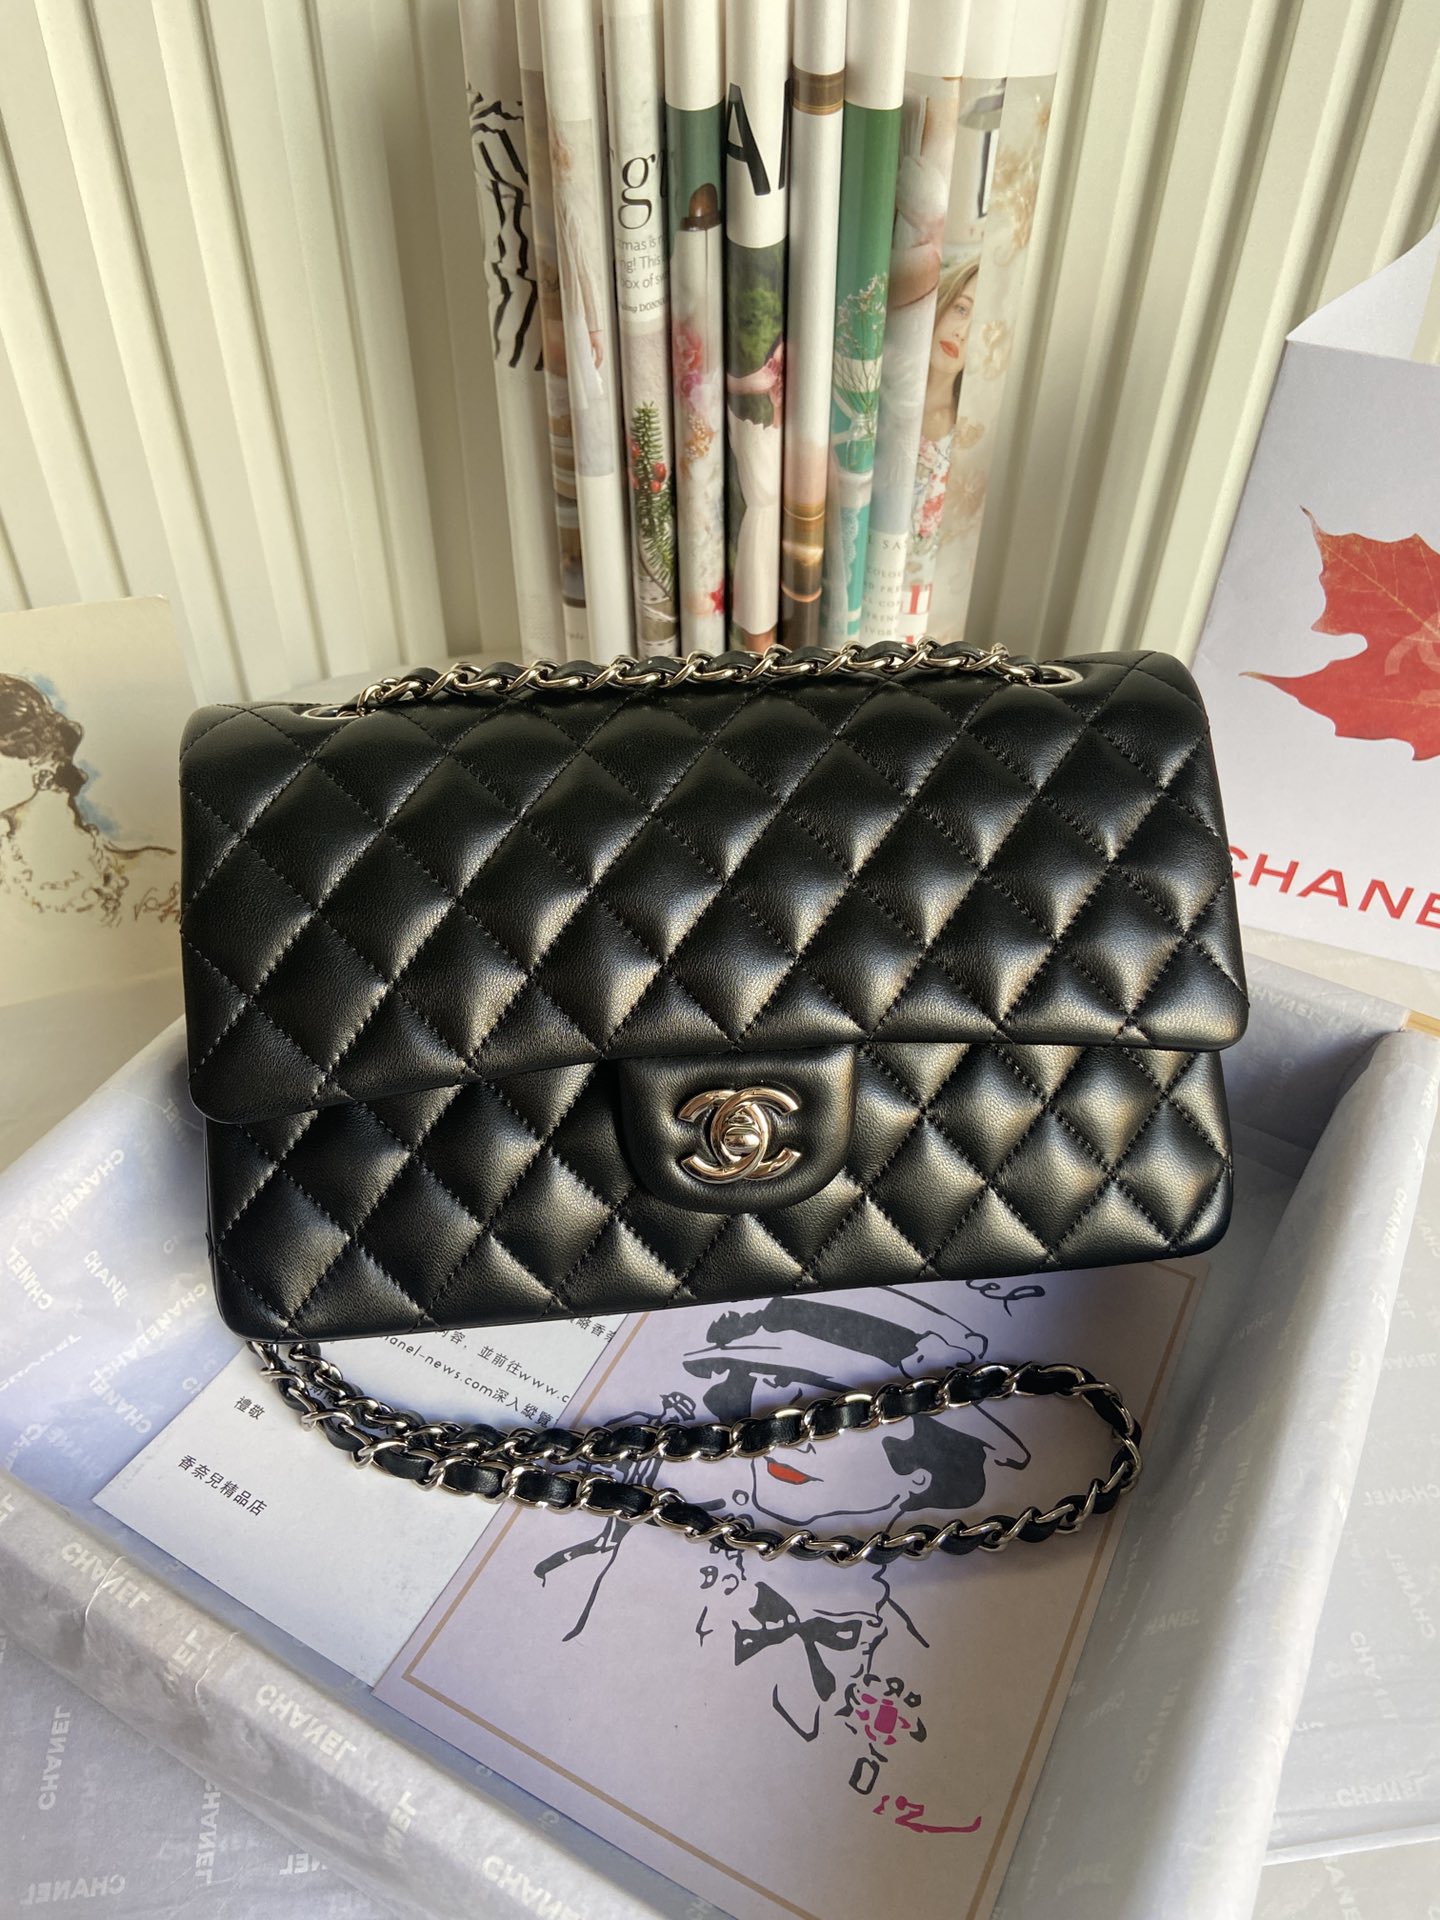 Wholesale Cheap C hanel Aaa bags for Sale